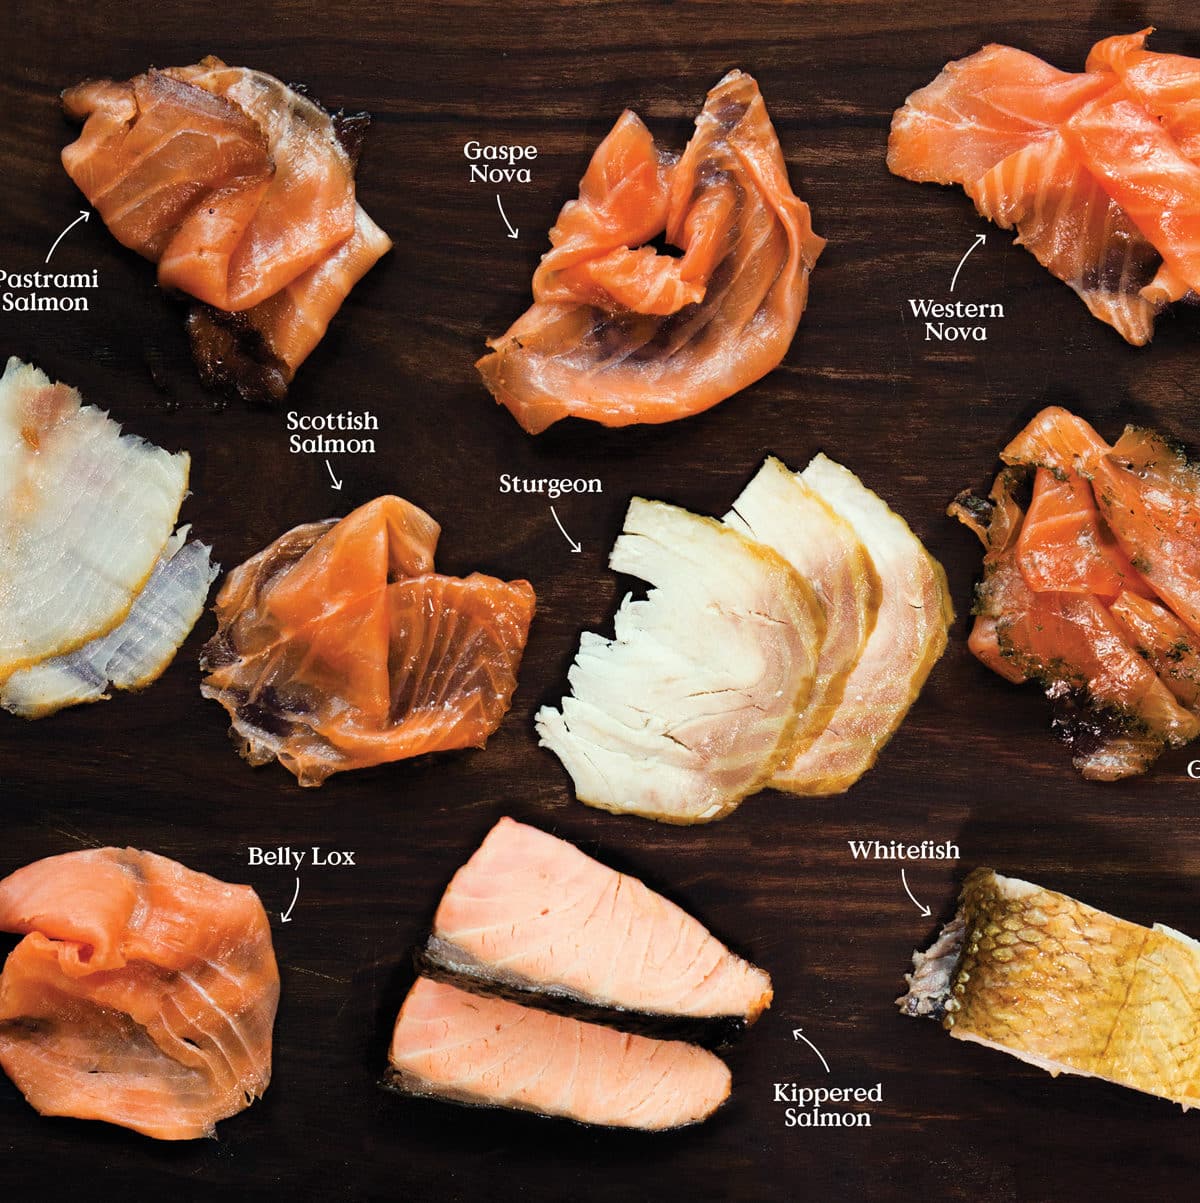 What's the Difference Between Lox, Nova, and Smoked Salmon?